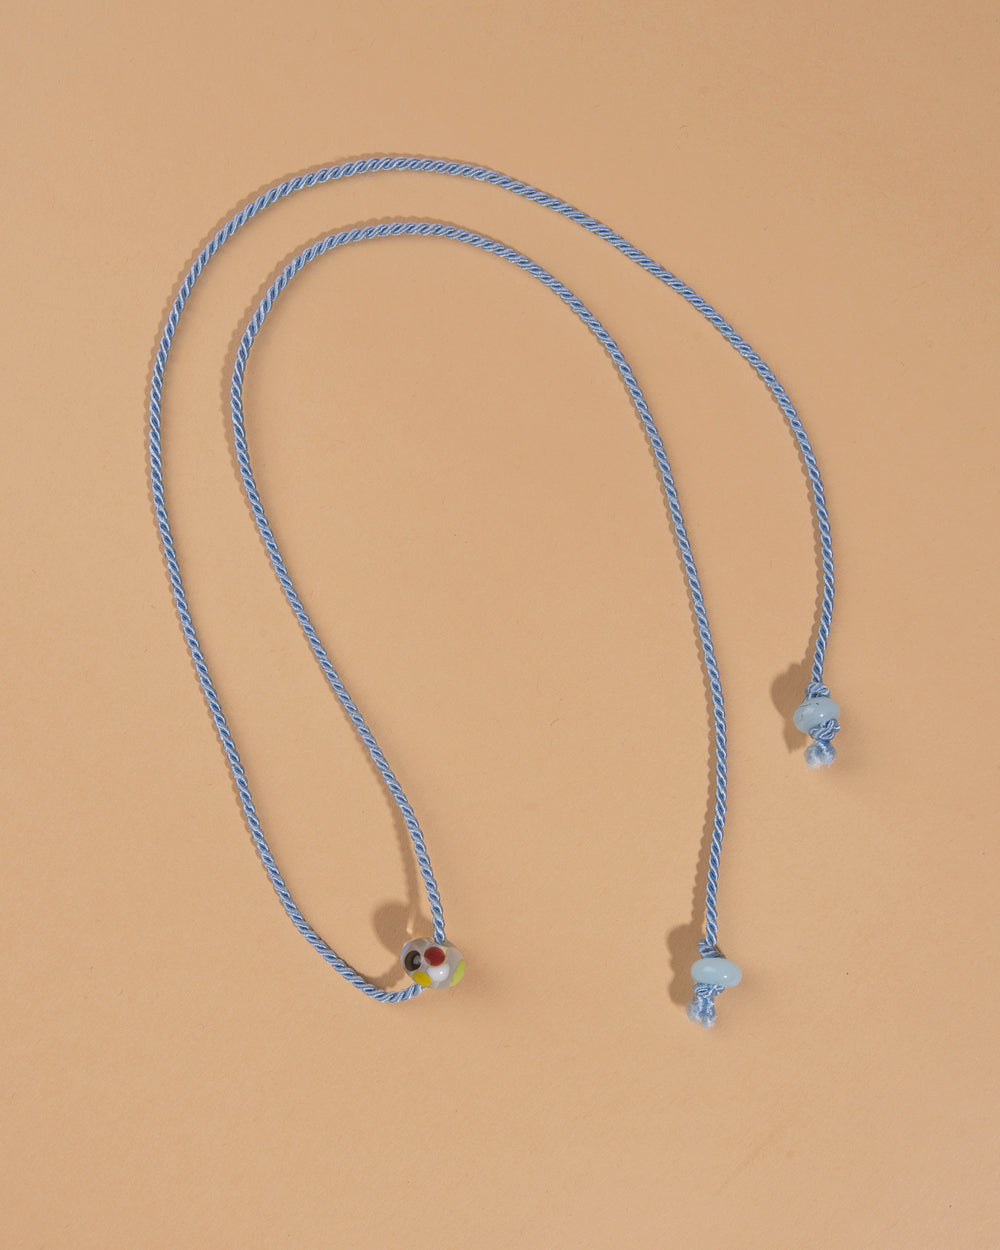 Glass Bead and Rope Necklace – Small Multi Blue